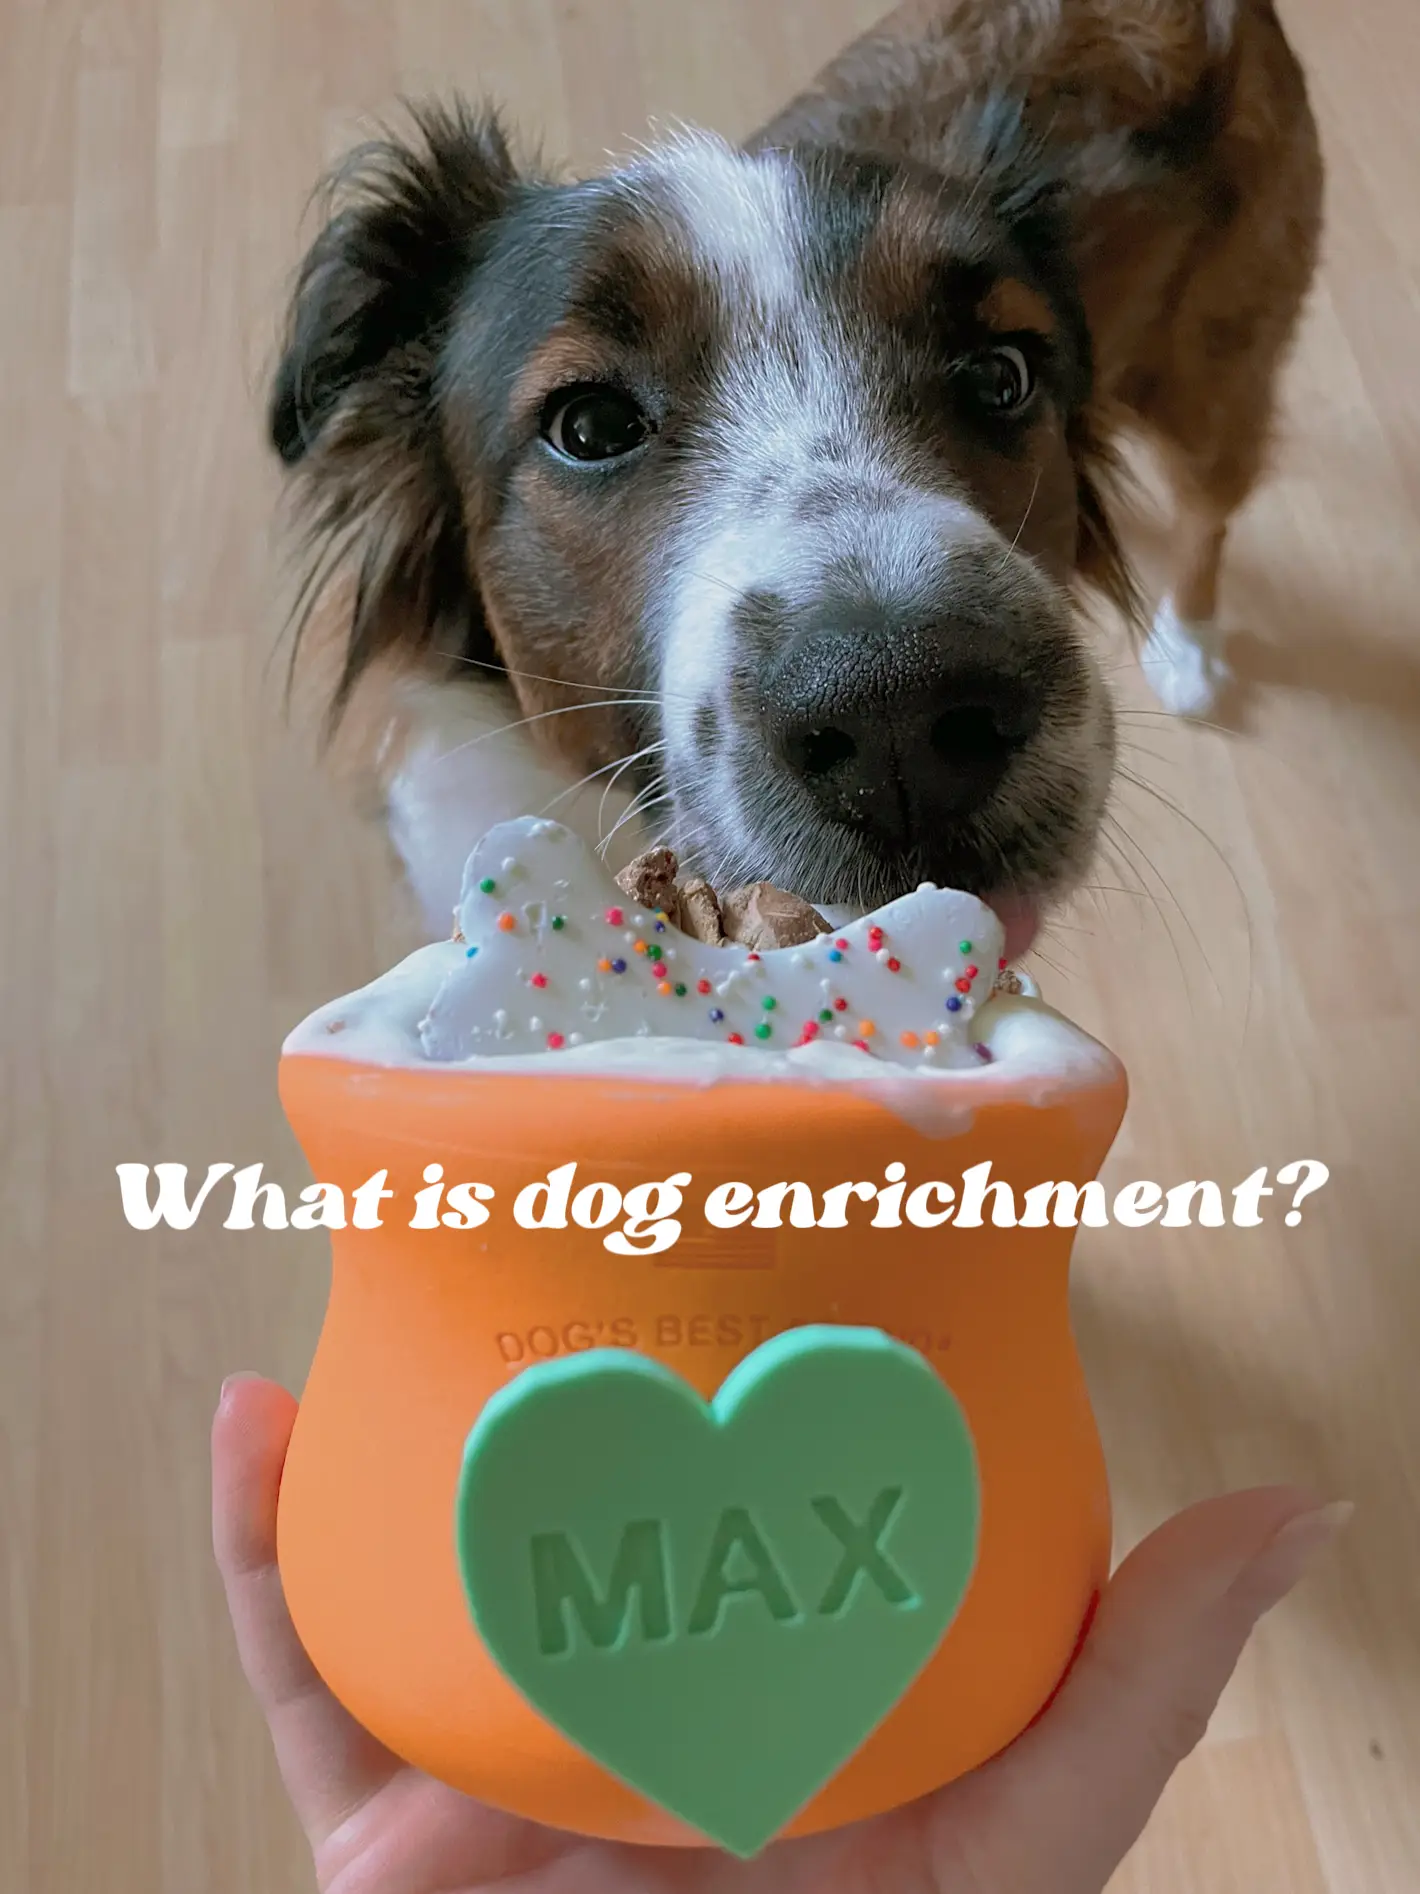 Dog treat and enrichment recipes